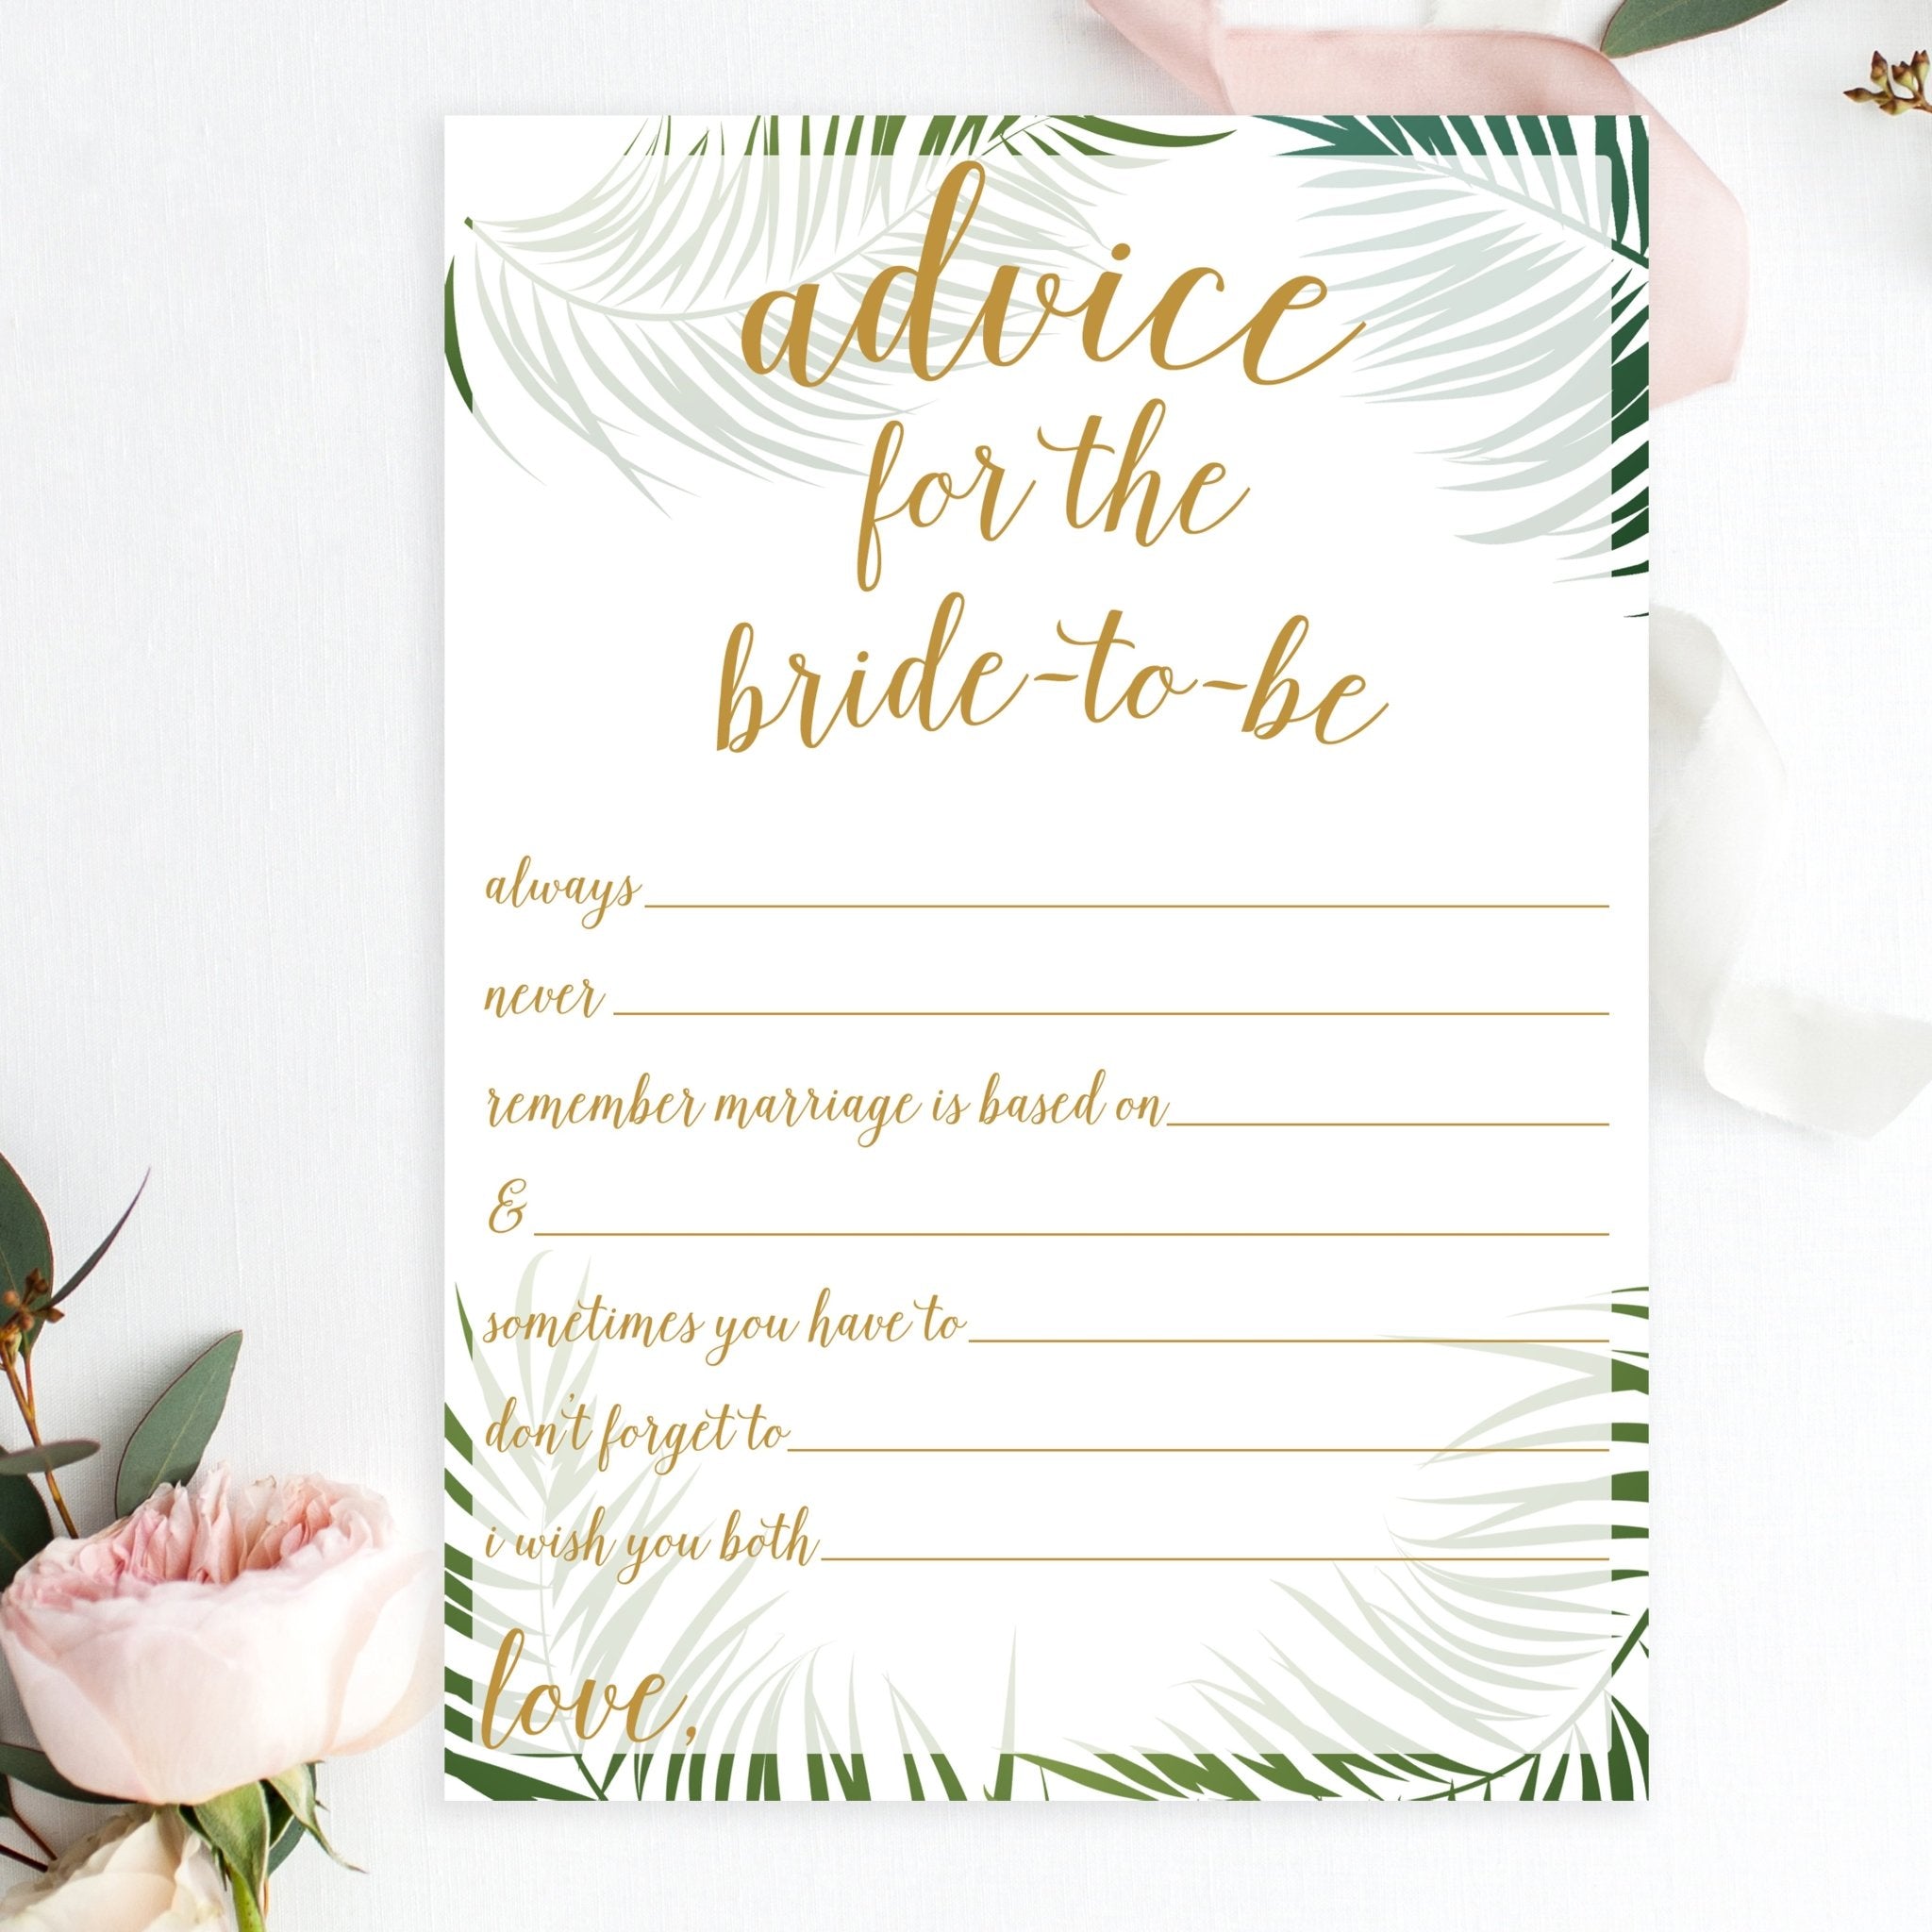 advice-for-the-bride-to-be-free-printable-printable-form-templates